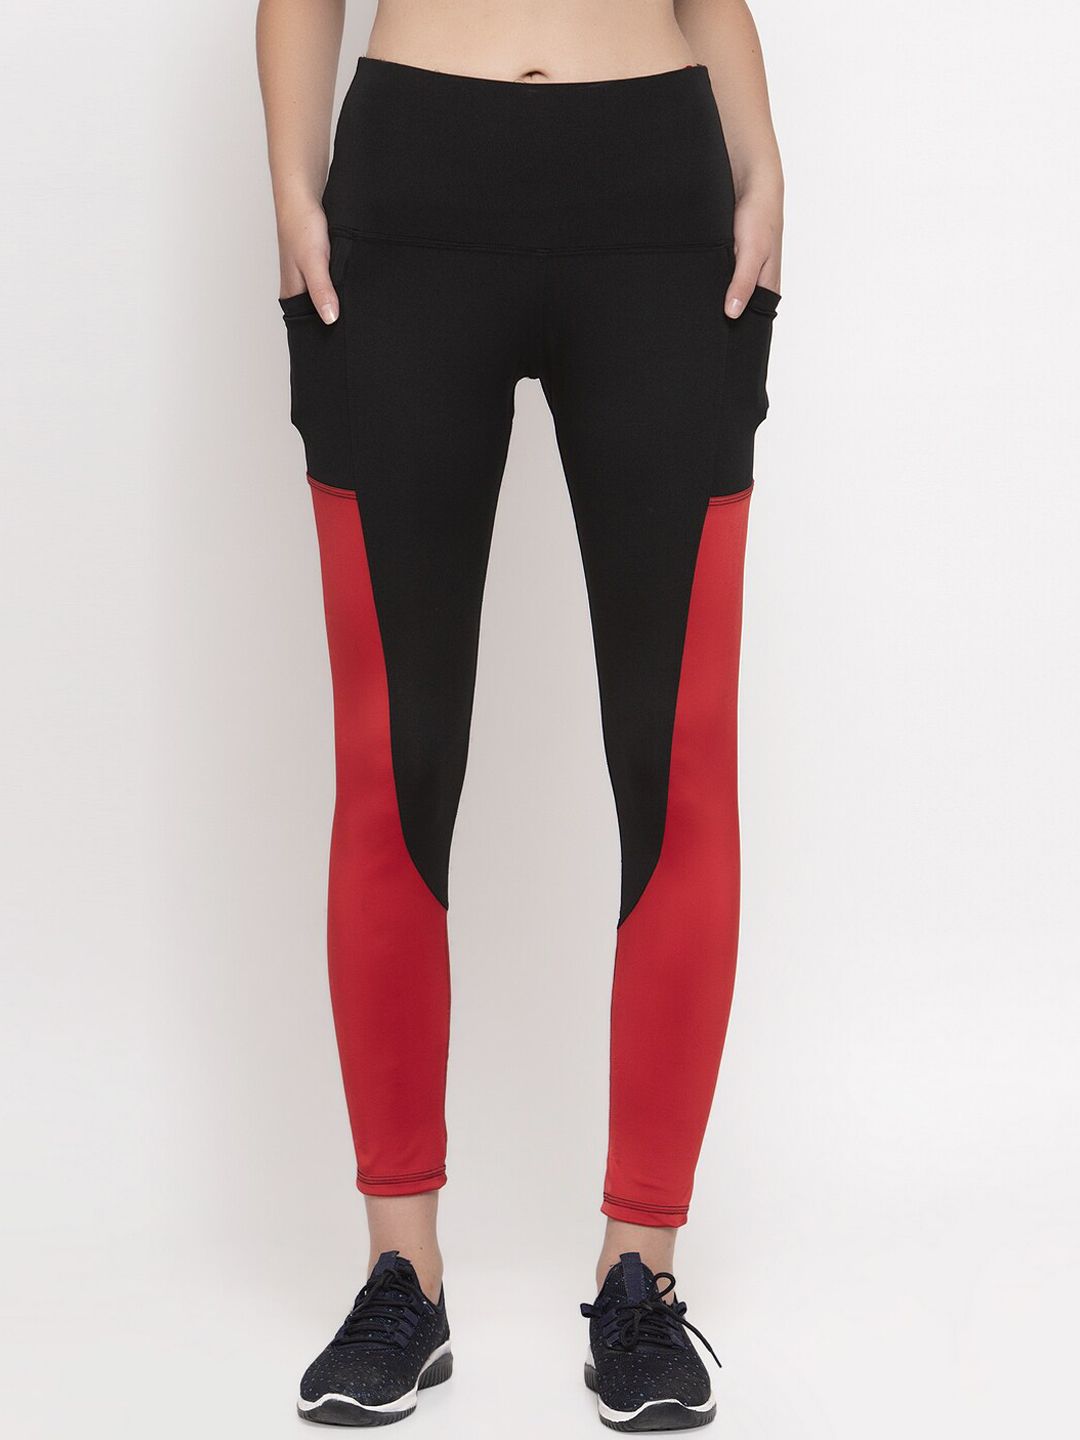 CUKOO Women Red & Black Colourblocked Tights Price in India